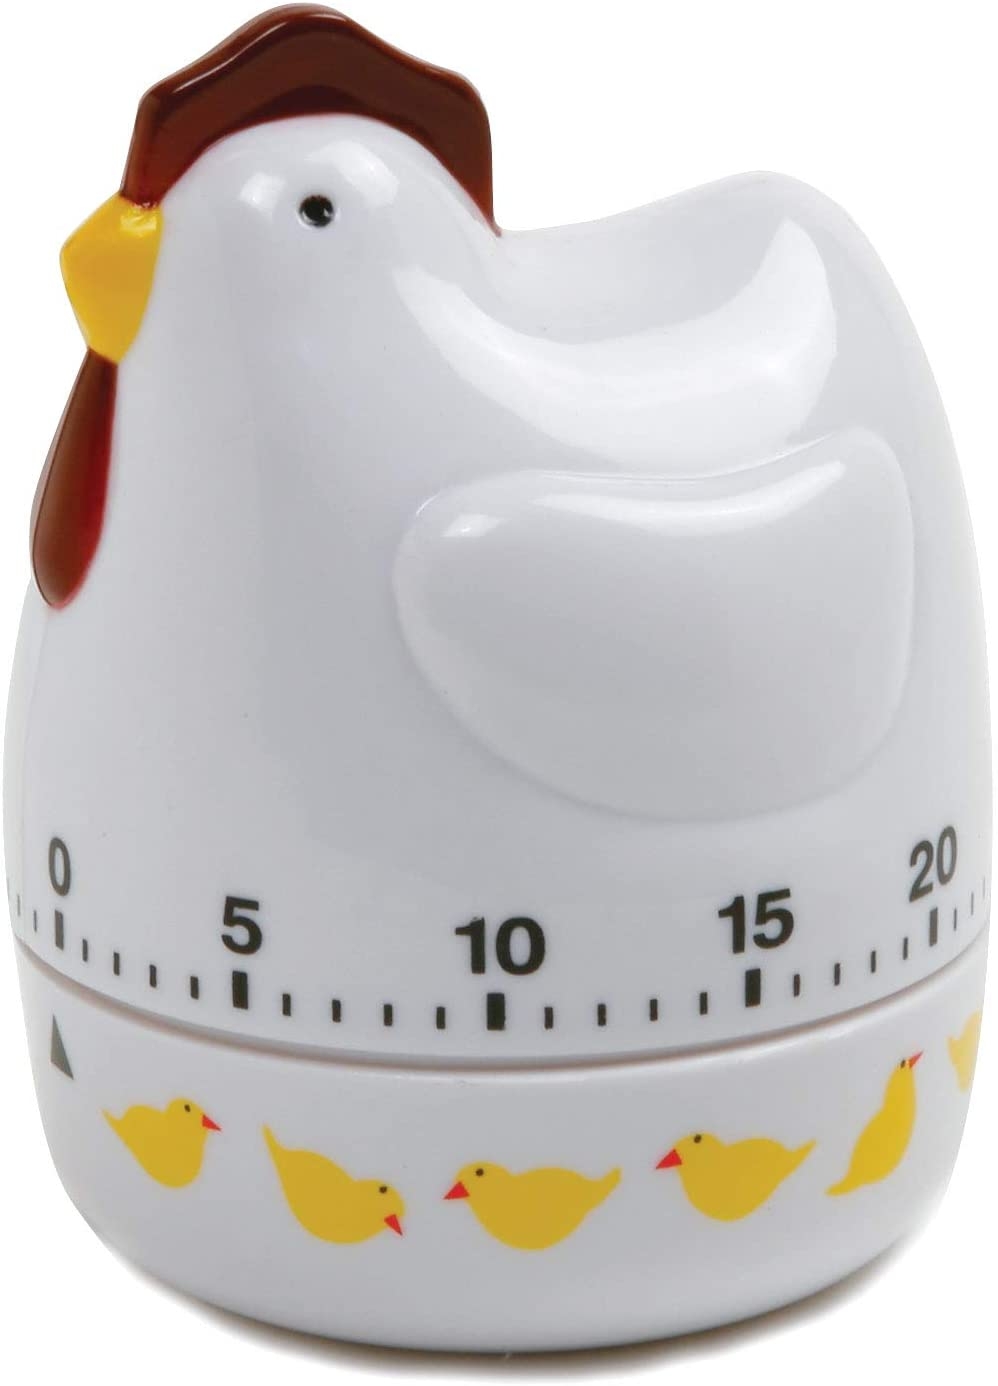 Norpro Chicken Timer, One Size Fits All, As Shown Import To Shop ×Product customization General Description Gallery Reviews